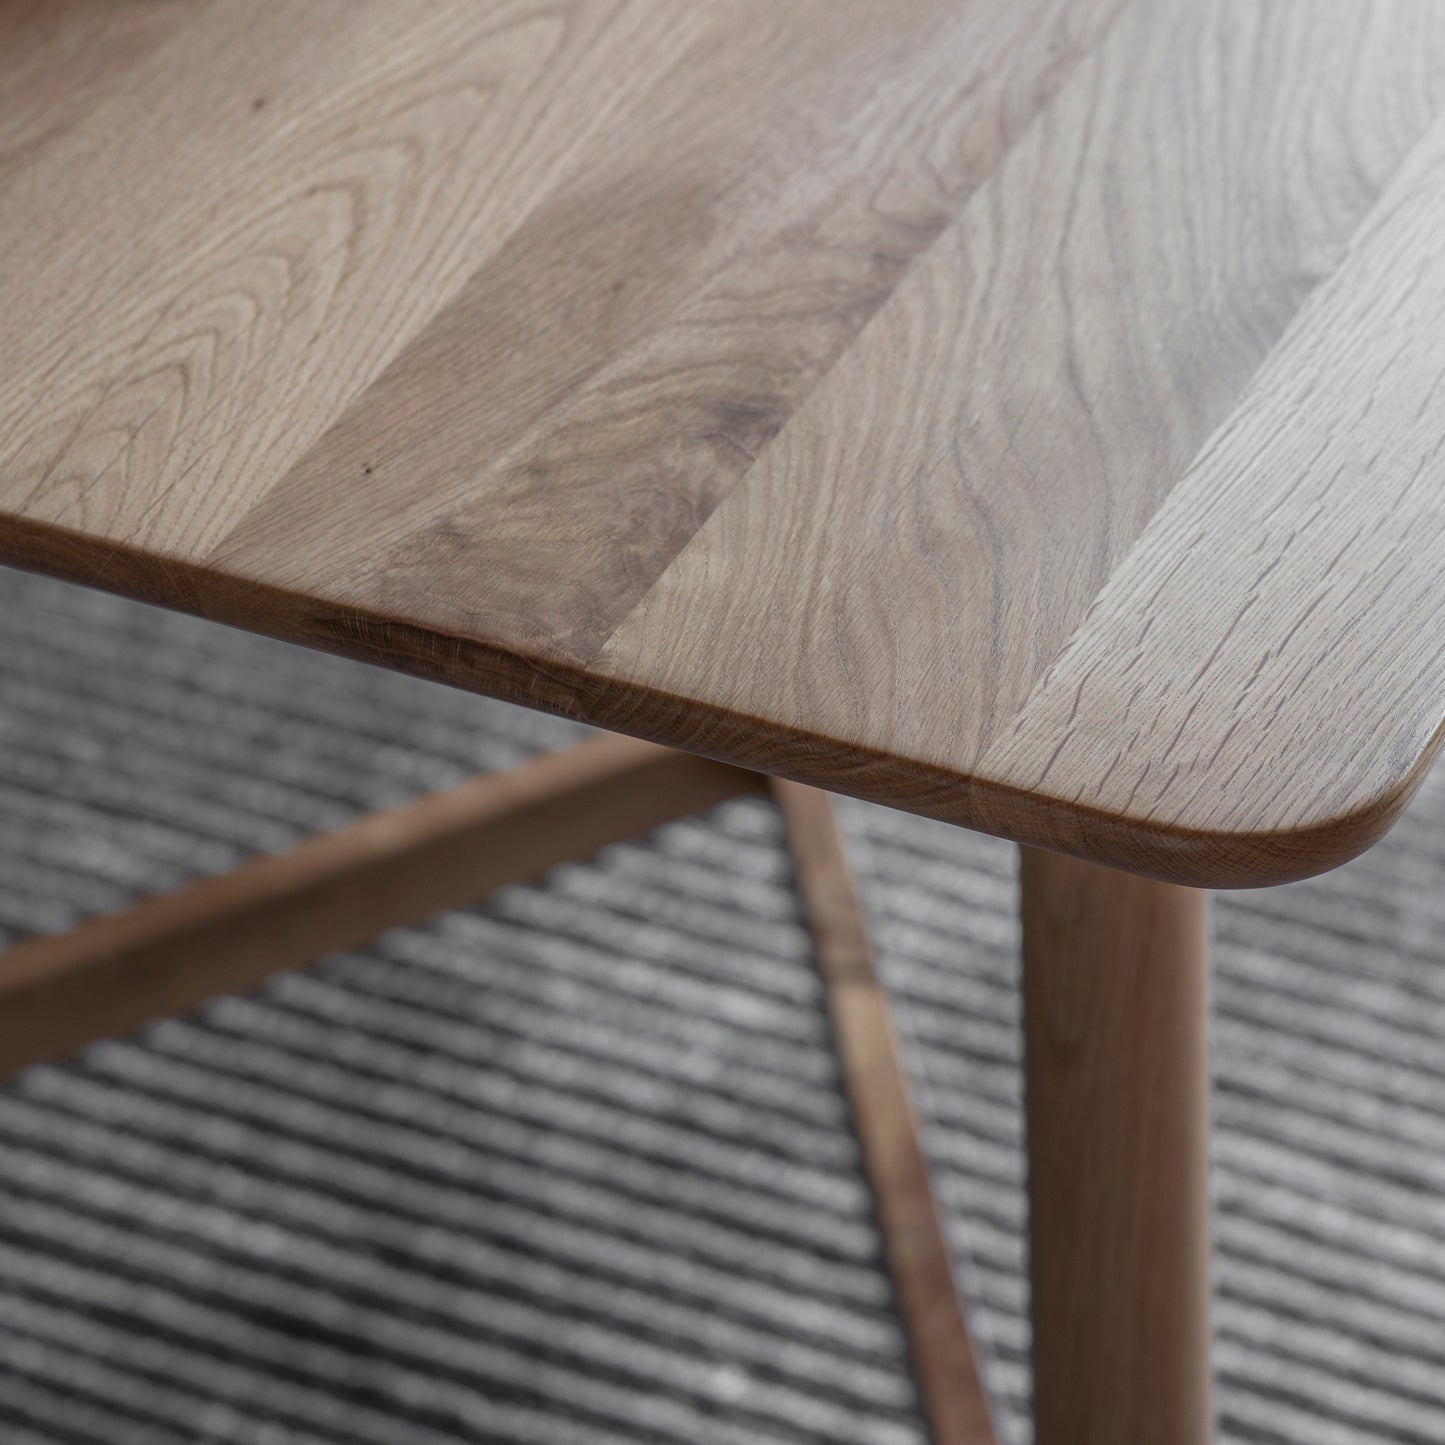 A close up of a Wembury Dining Table 1500x950x750mm by Kikiathome.co.uk on a rug, showcasing interior decor.